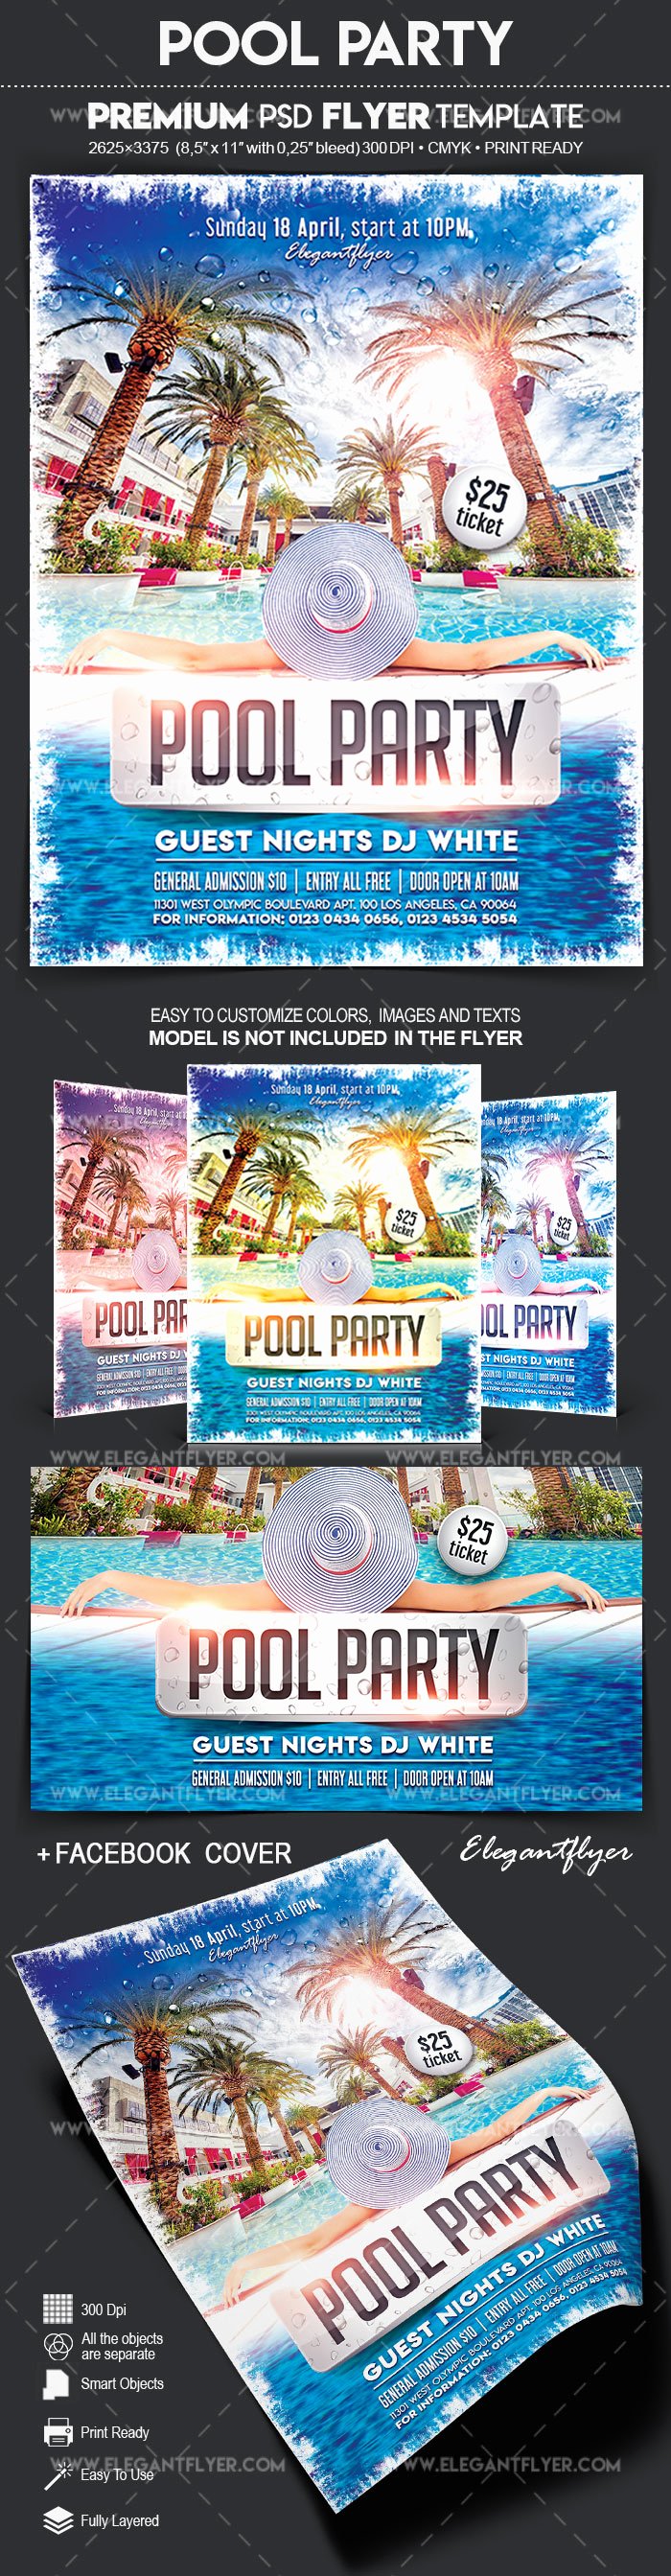 Pool Party Flyers Templates Inspirational Pool Party – Flyer Psd Template – by Elegantflyer